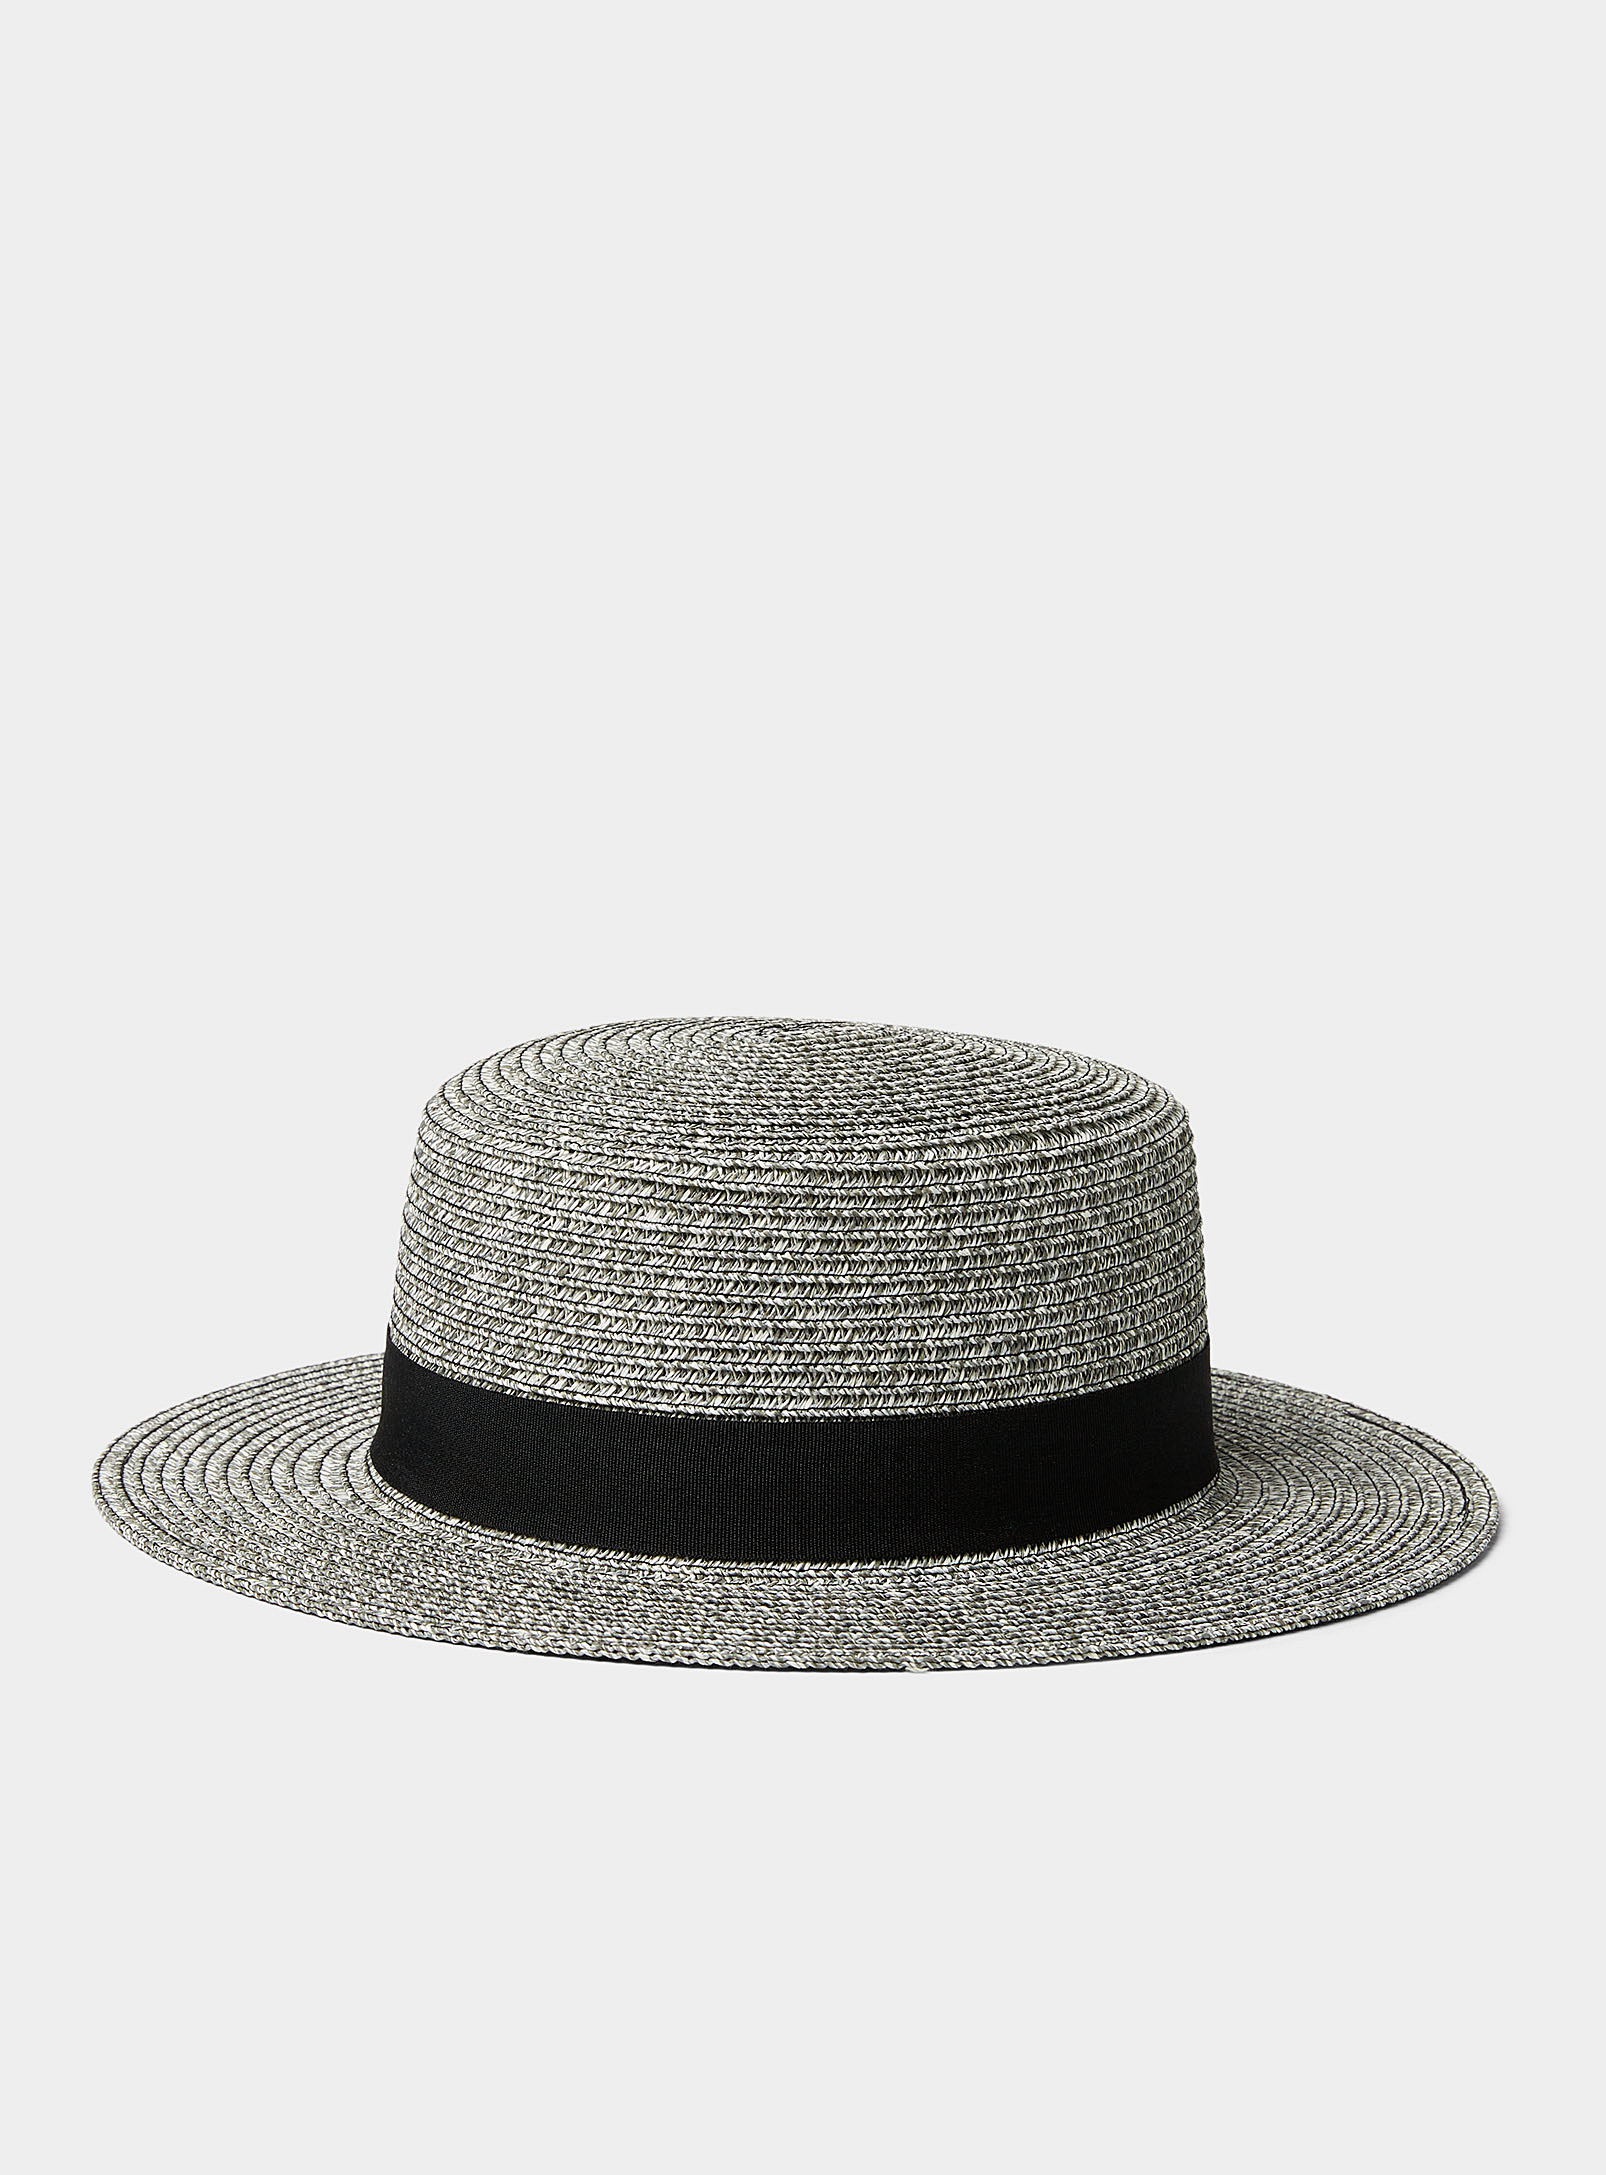 Canadian Hat Ebony Band Boater In Gray